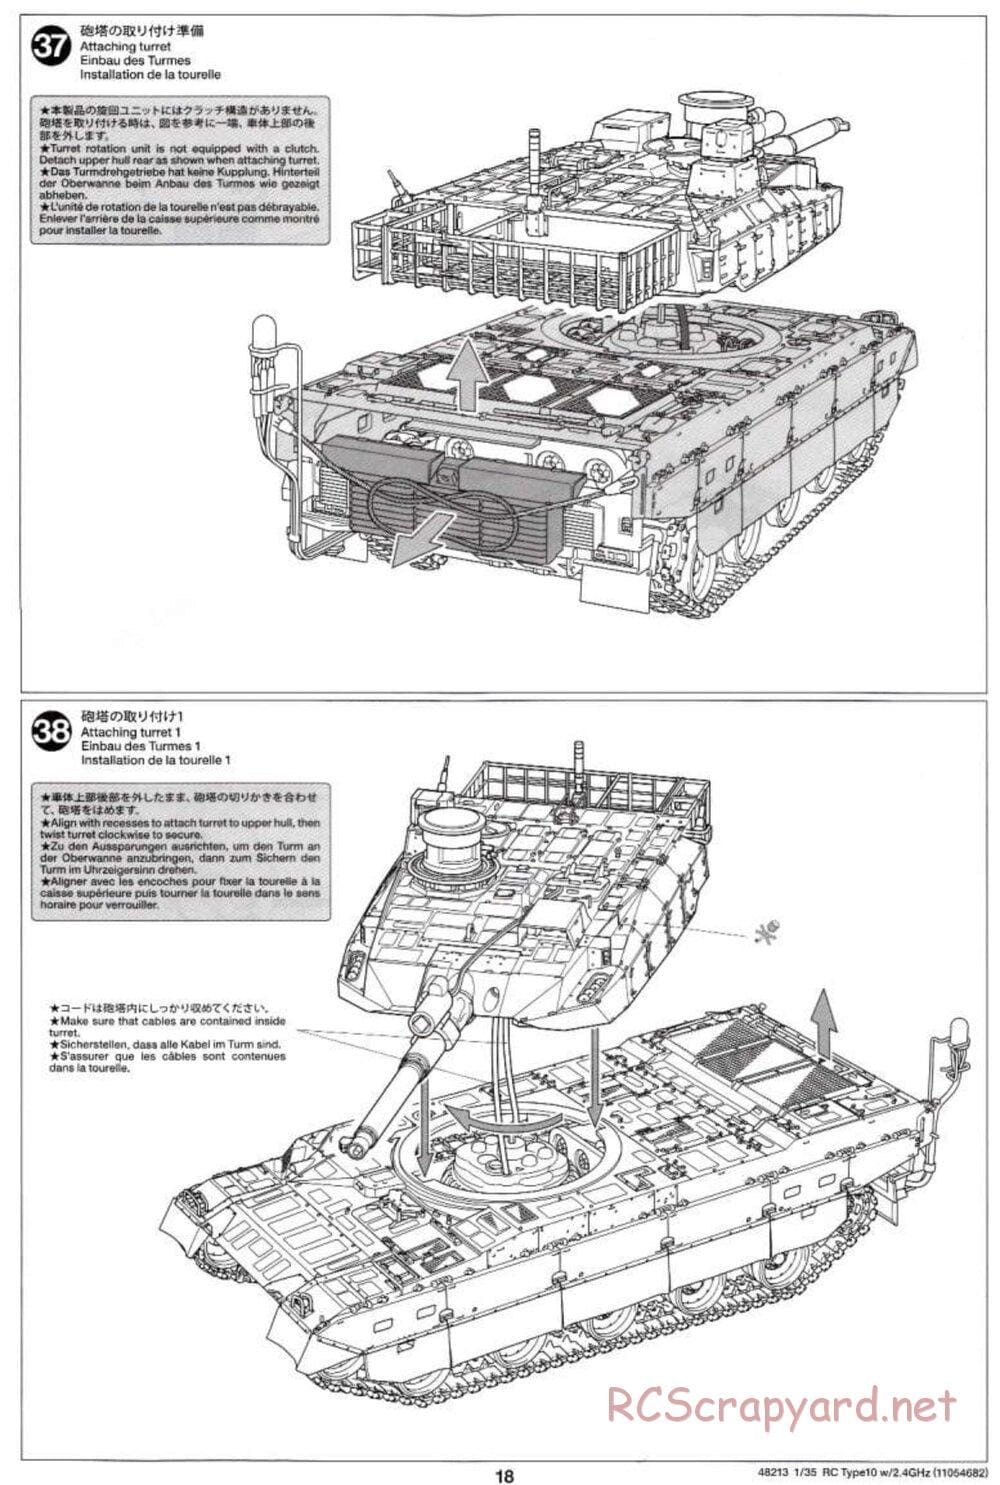 Tamiya - JGSDF Type 10 Tank - 1/35 Scale Chassis - Manual - Page 18